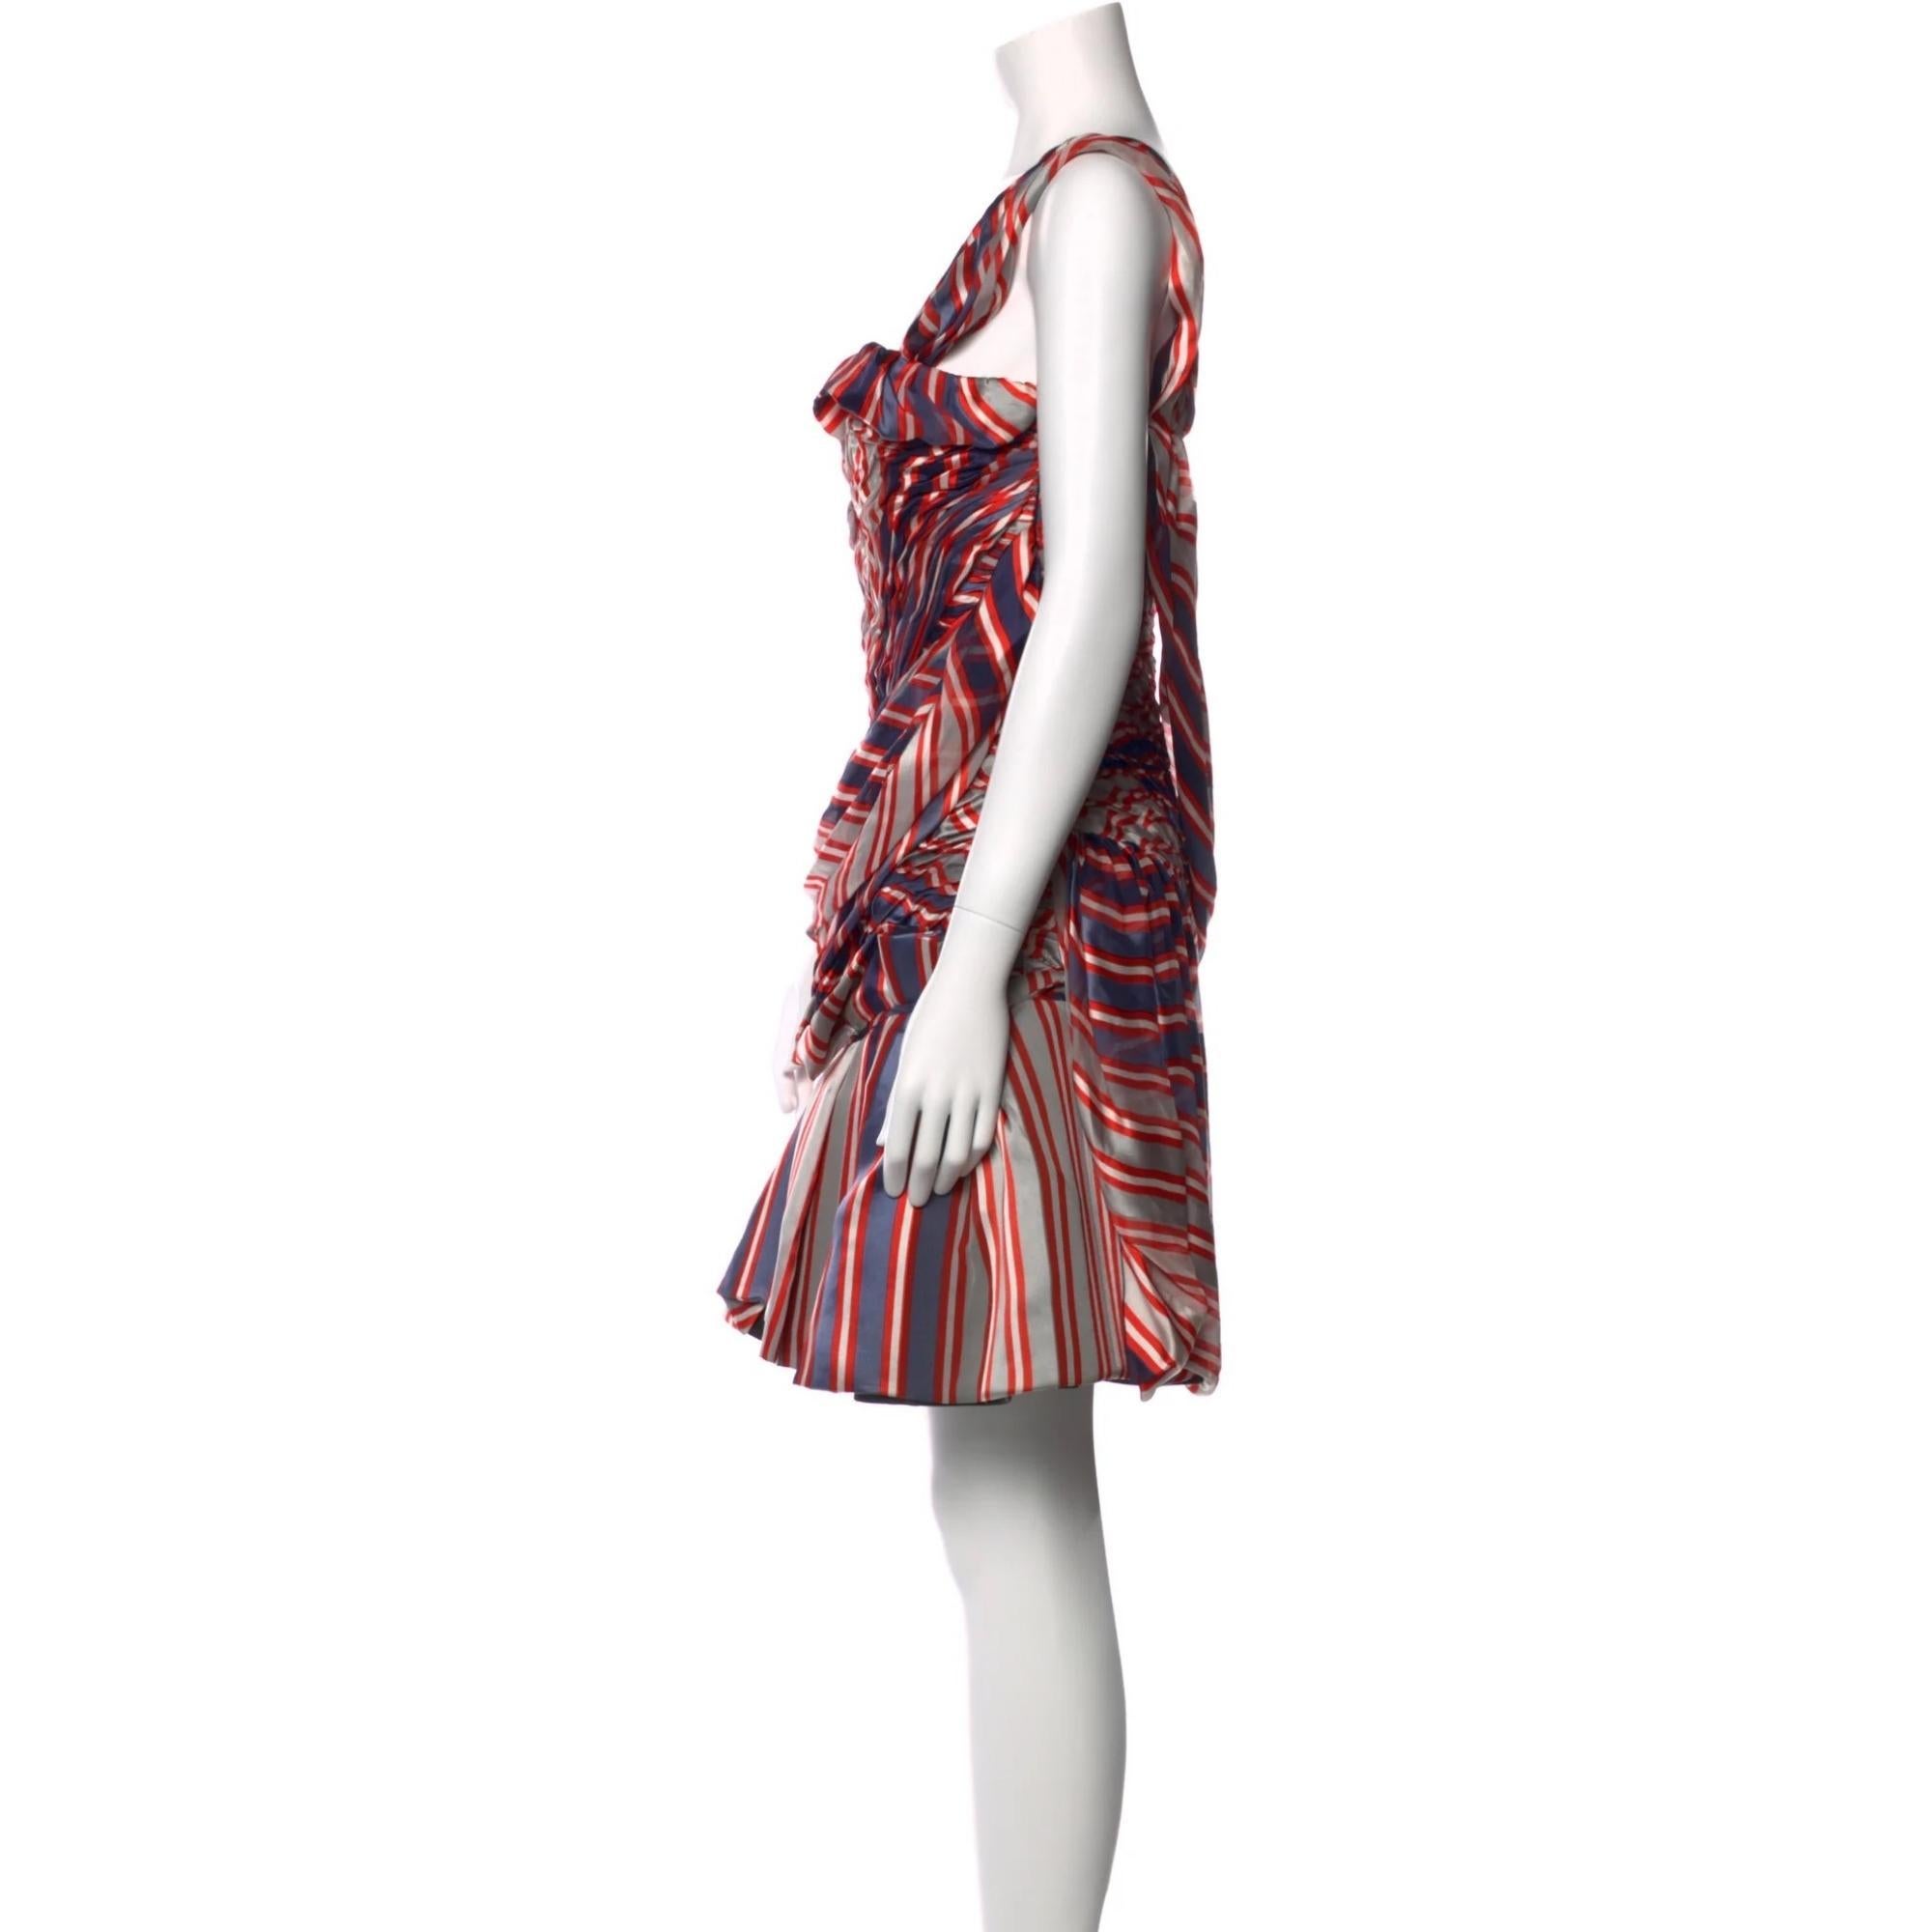 Christian Lacroix Silk A-Line Dress. Red. Printed. Pleated & Ruffle Accents. Sleeveless with One-Shoulder. Concealed Zip Closure at Sider

COLOR: Red
MATERIAL: 100% Silk; Lining 100% Silk; Combo 71% Silk, 29% Cotton

SIZE: M  US8,